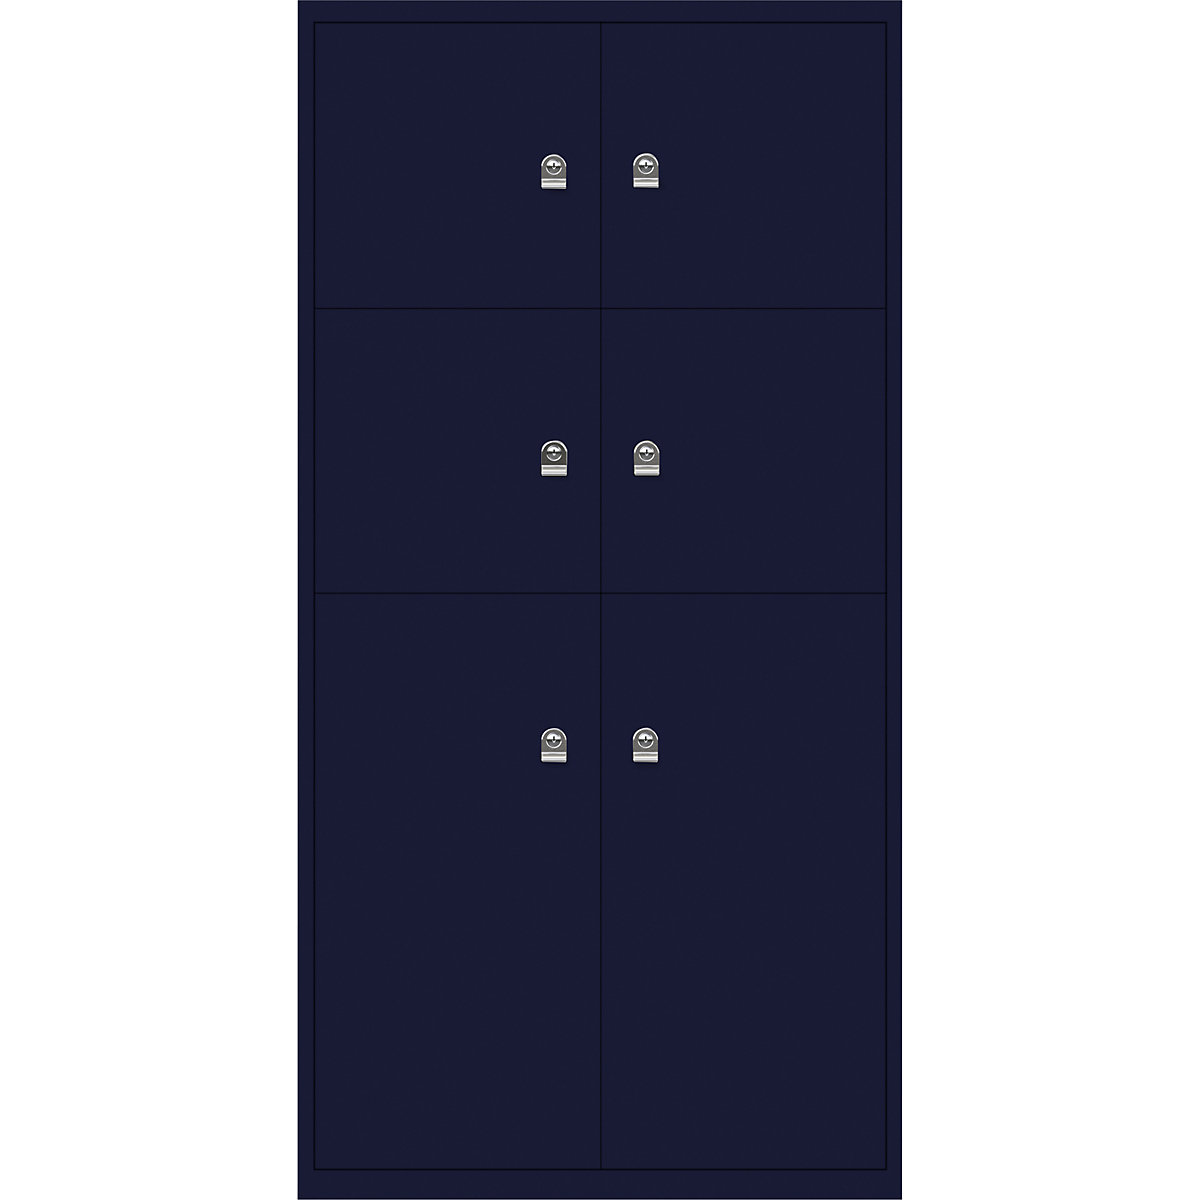 LateralFile™ lodge – BISLEY, with 6 lockable compartments, height 4 x 375 mm, 2 x 755 mm, oxford blue-18